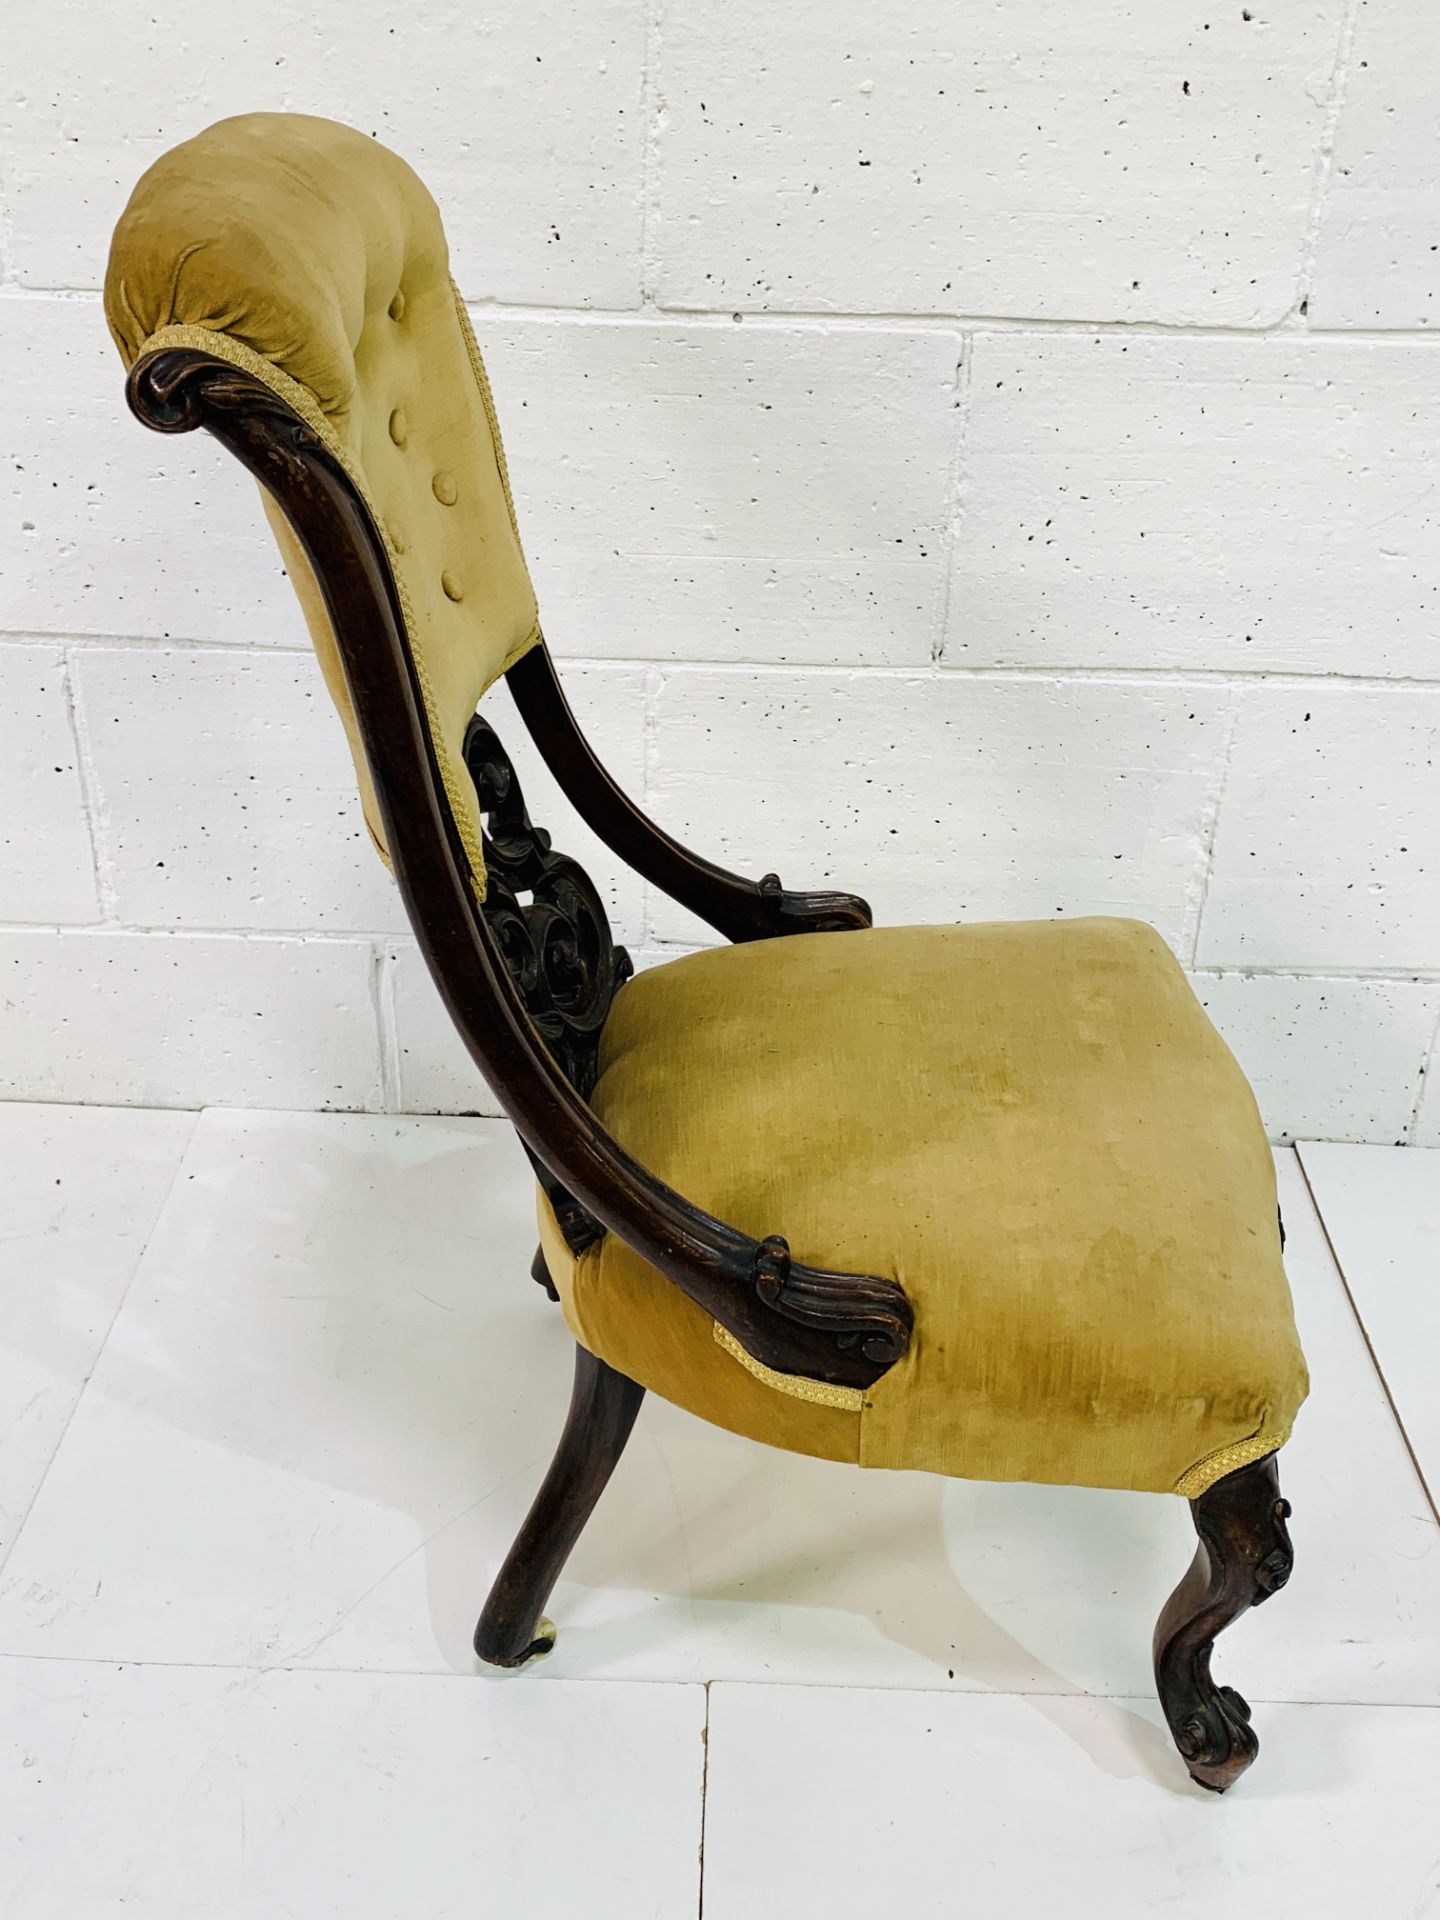 Ornately decorated mahogany framed drawing room chair with buttoned back mustard upholstrey. - Image 4 of 5